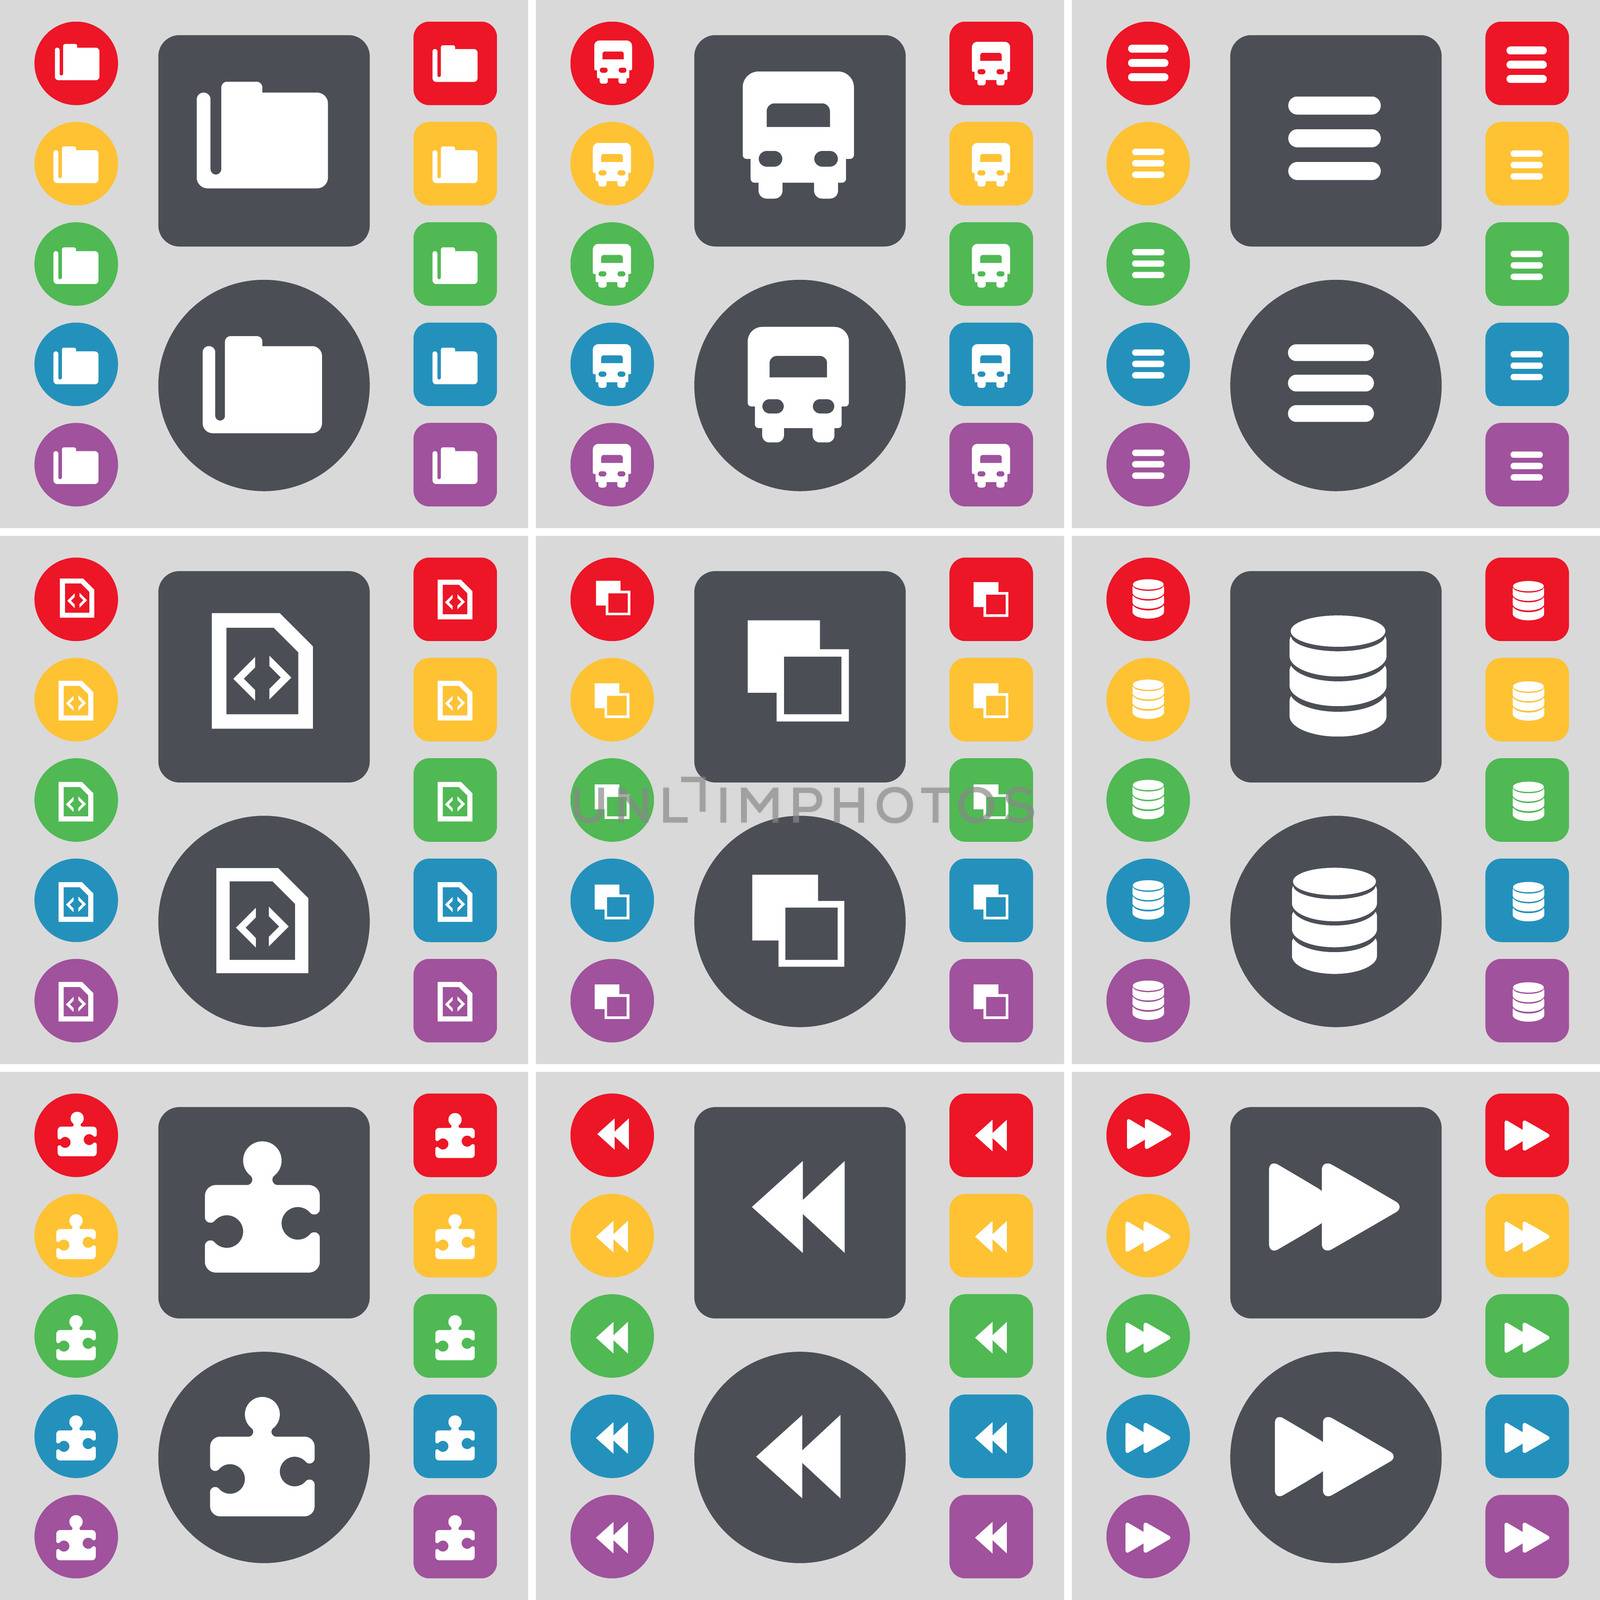 Folder, Truck, Apps, File, Copy, Database, Pazzle part, Rewind icon symbol. A large set of flat, colored buttons for your design.  by serhii_lohvyniuk